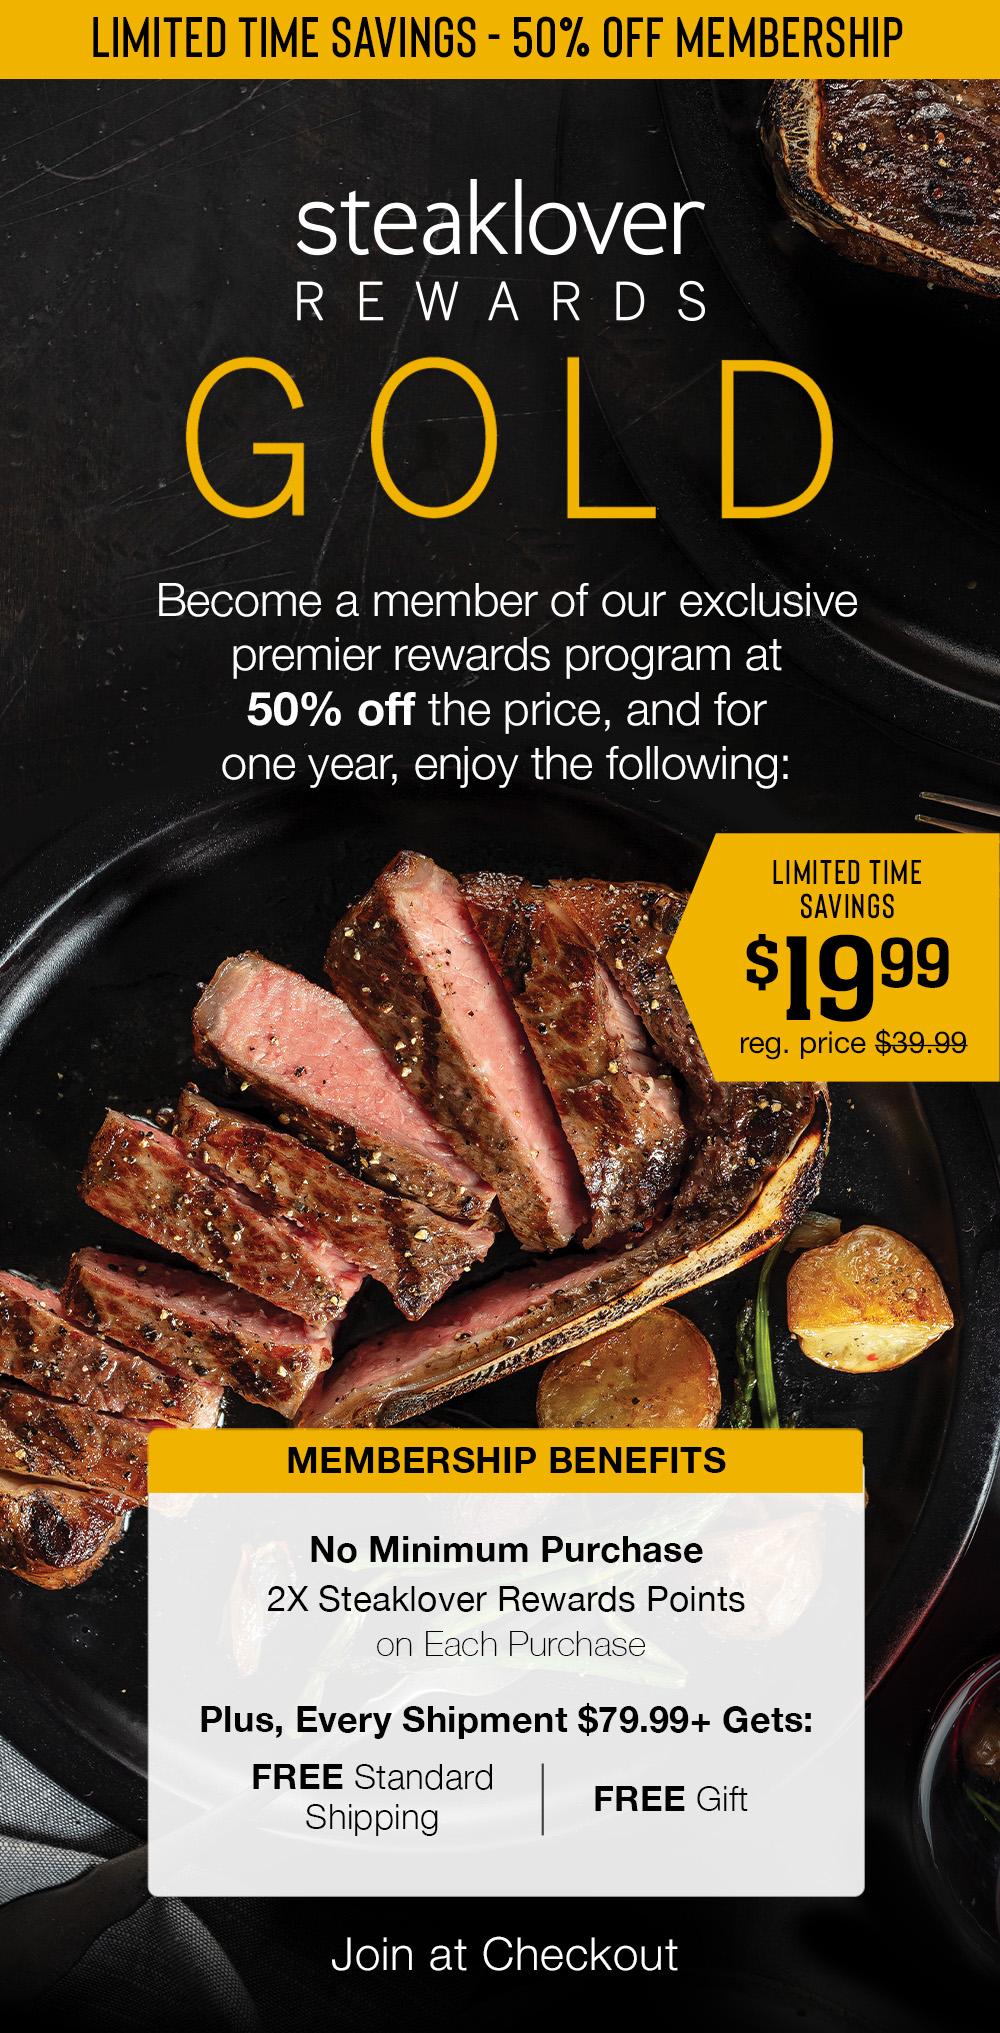 LIMITED TIME SAVINGS - 50% OFF MEMBERSHIP | steaklover REWARDS GOLD | Become a member of our exclusive premier rewards program at 50% off the price, and for one year, enjoy the following: Join at Checkout | LIMITED TIME SAVINGS - $19.99 reg. price $39.99 | MEMBERSHIP BENEFITS - No Minimum Purchase - 2X Steaklover Rewards Points on Each Purchase | Plus, Every Shipment $79.99+ Gets:FREE Standard Shipping | FREE Gift